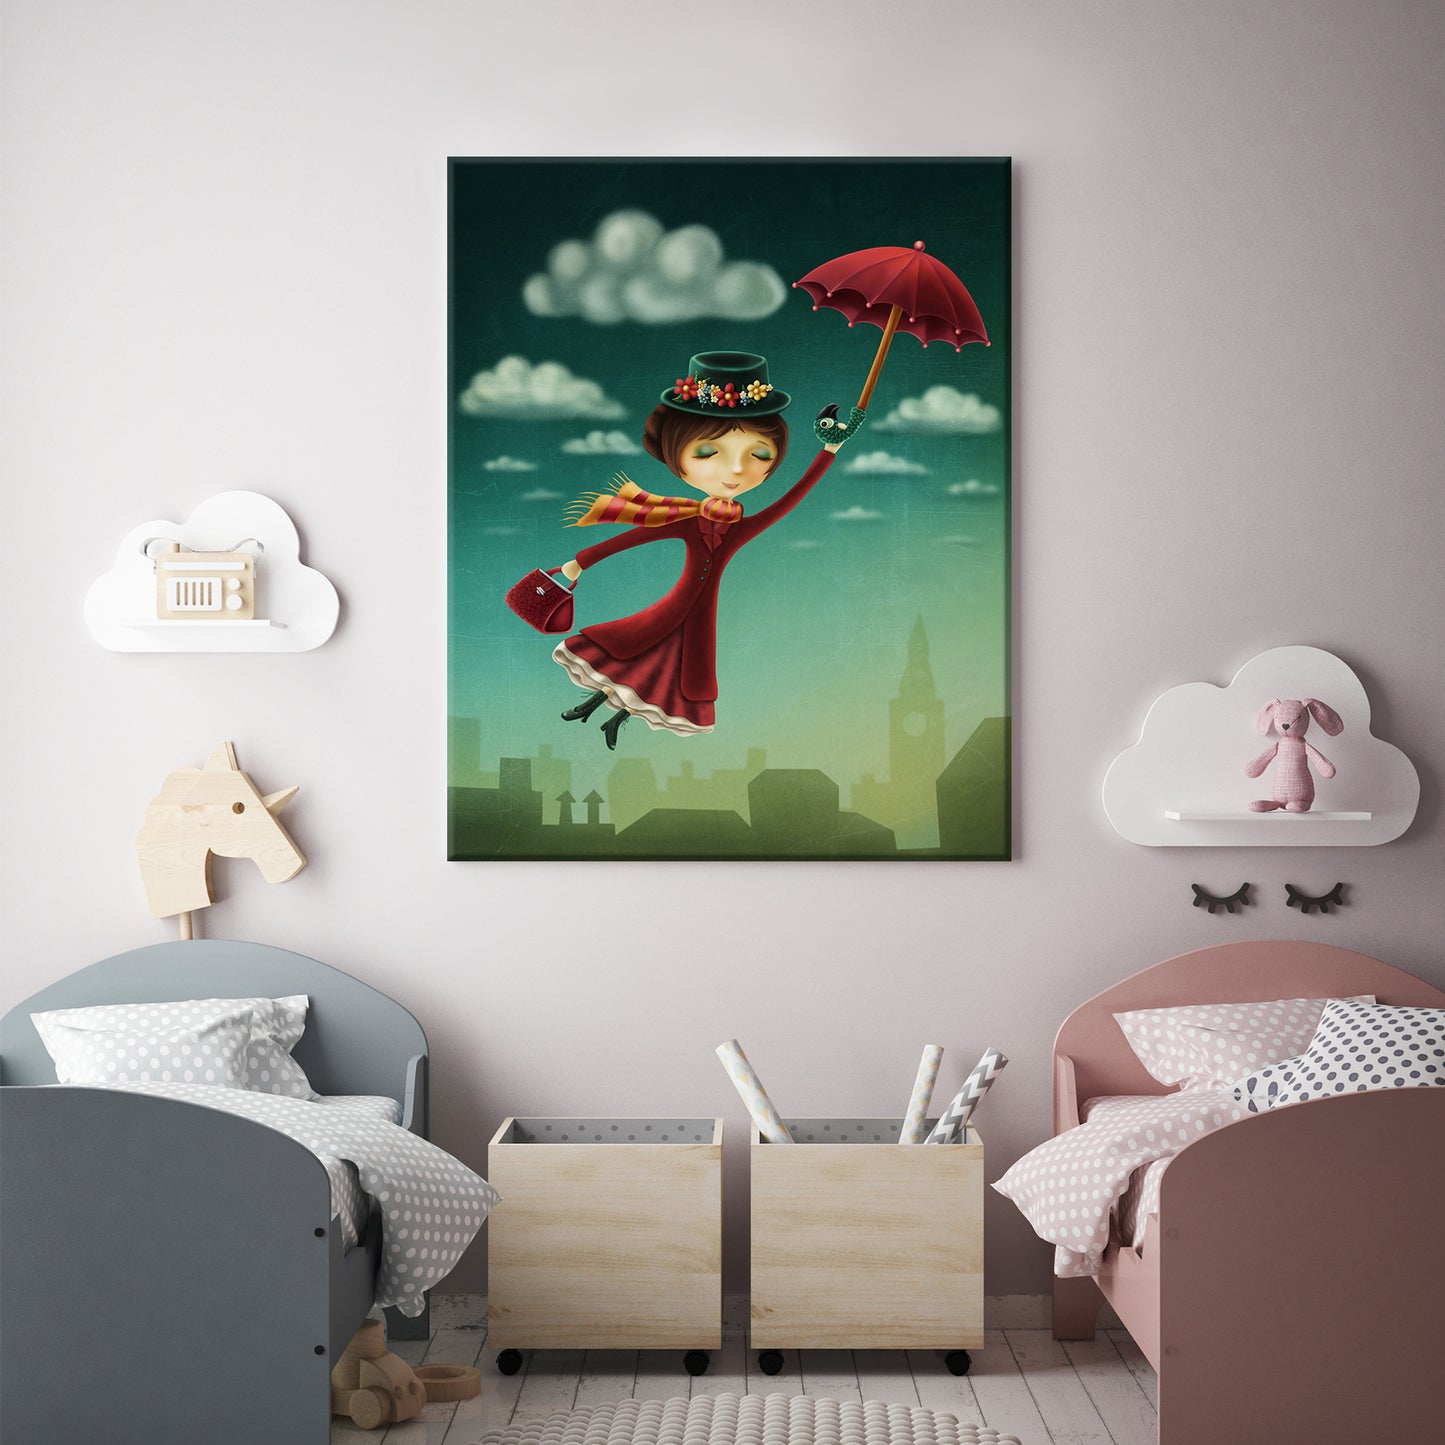 Mary Poppins Flying on Umbrella Canvas Print ArtLexy 1 Panel 16"x24" inches 